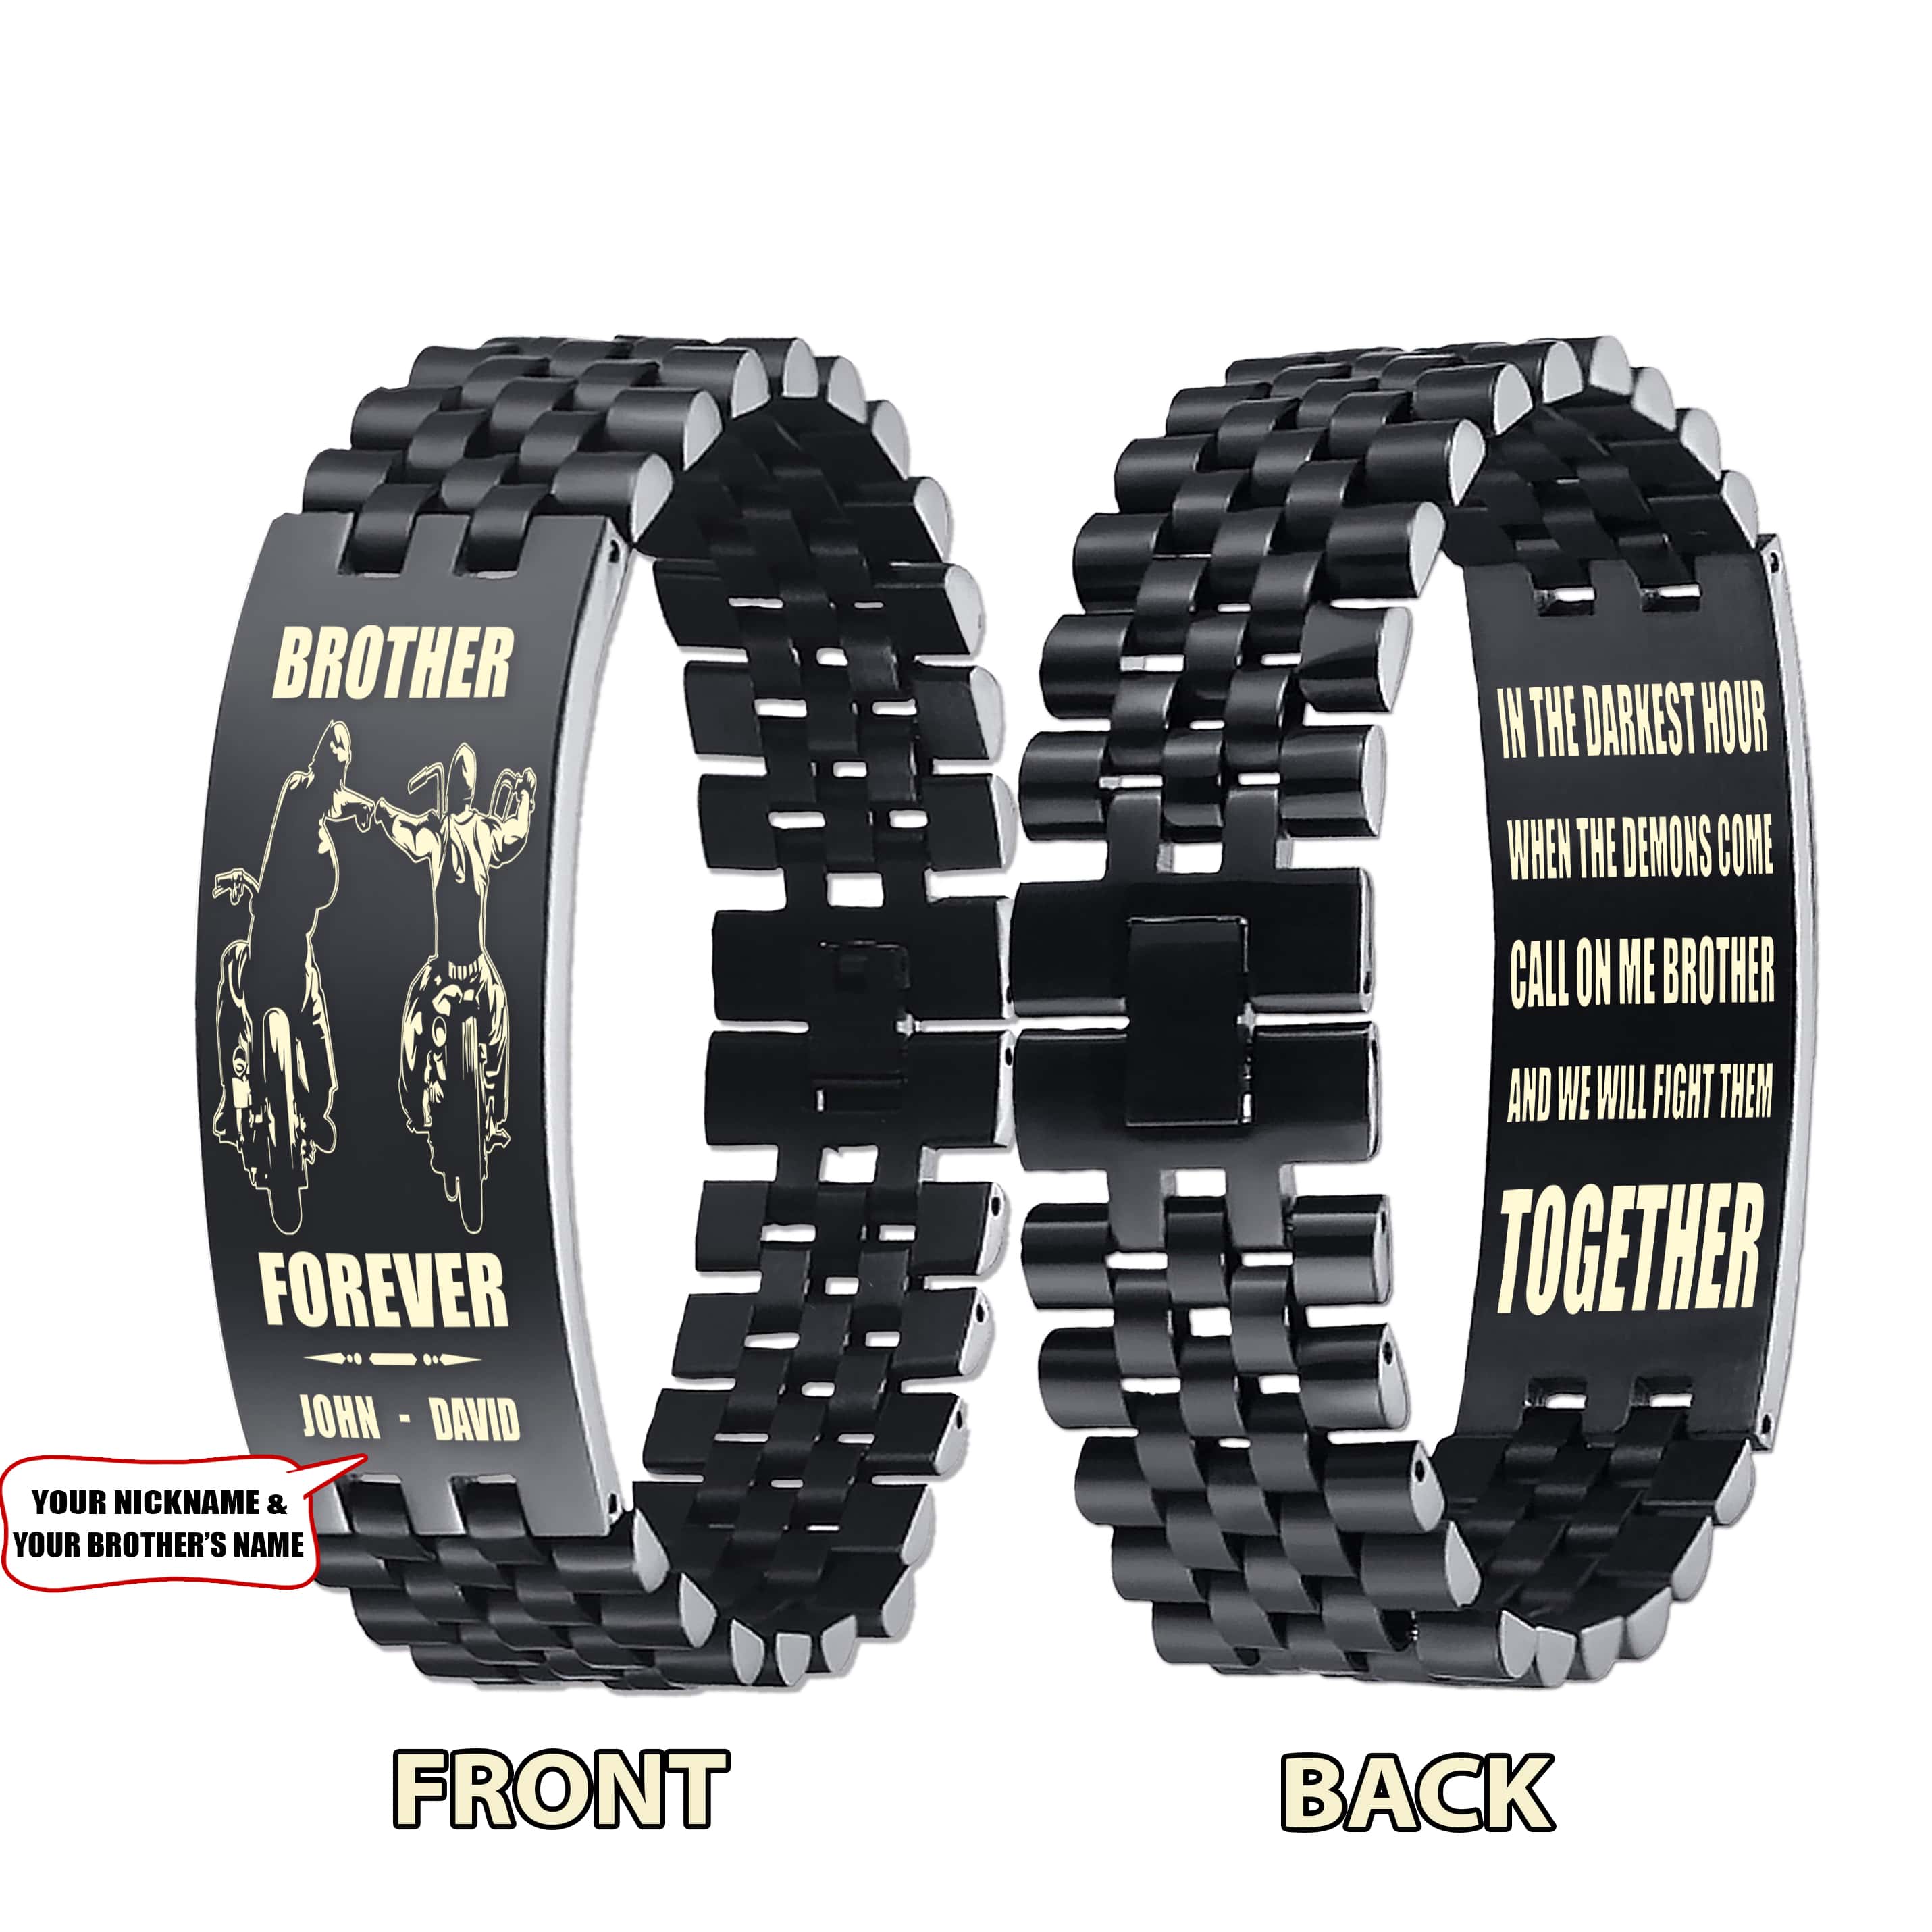 Customizable engraved brother bracelet double sided gift from brother, brother forever, in the darkest hour, When the demons come call on me brother and we will fight them together